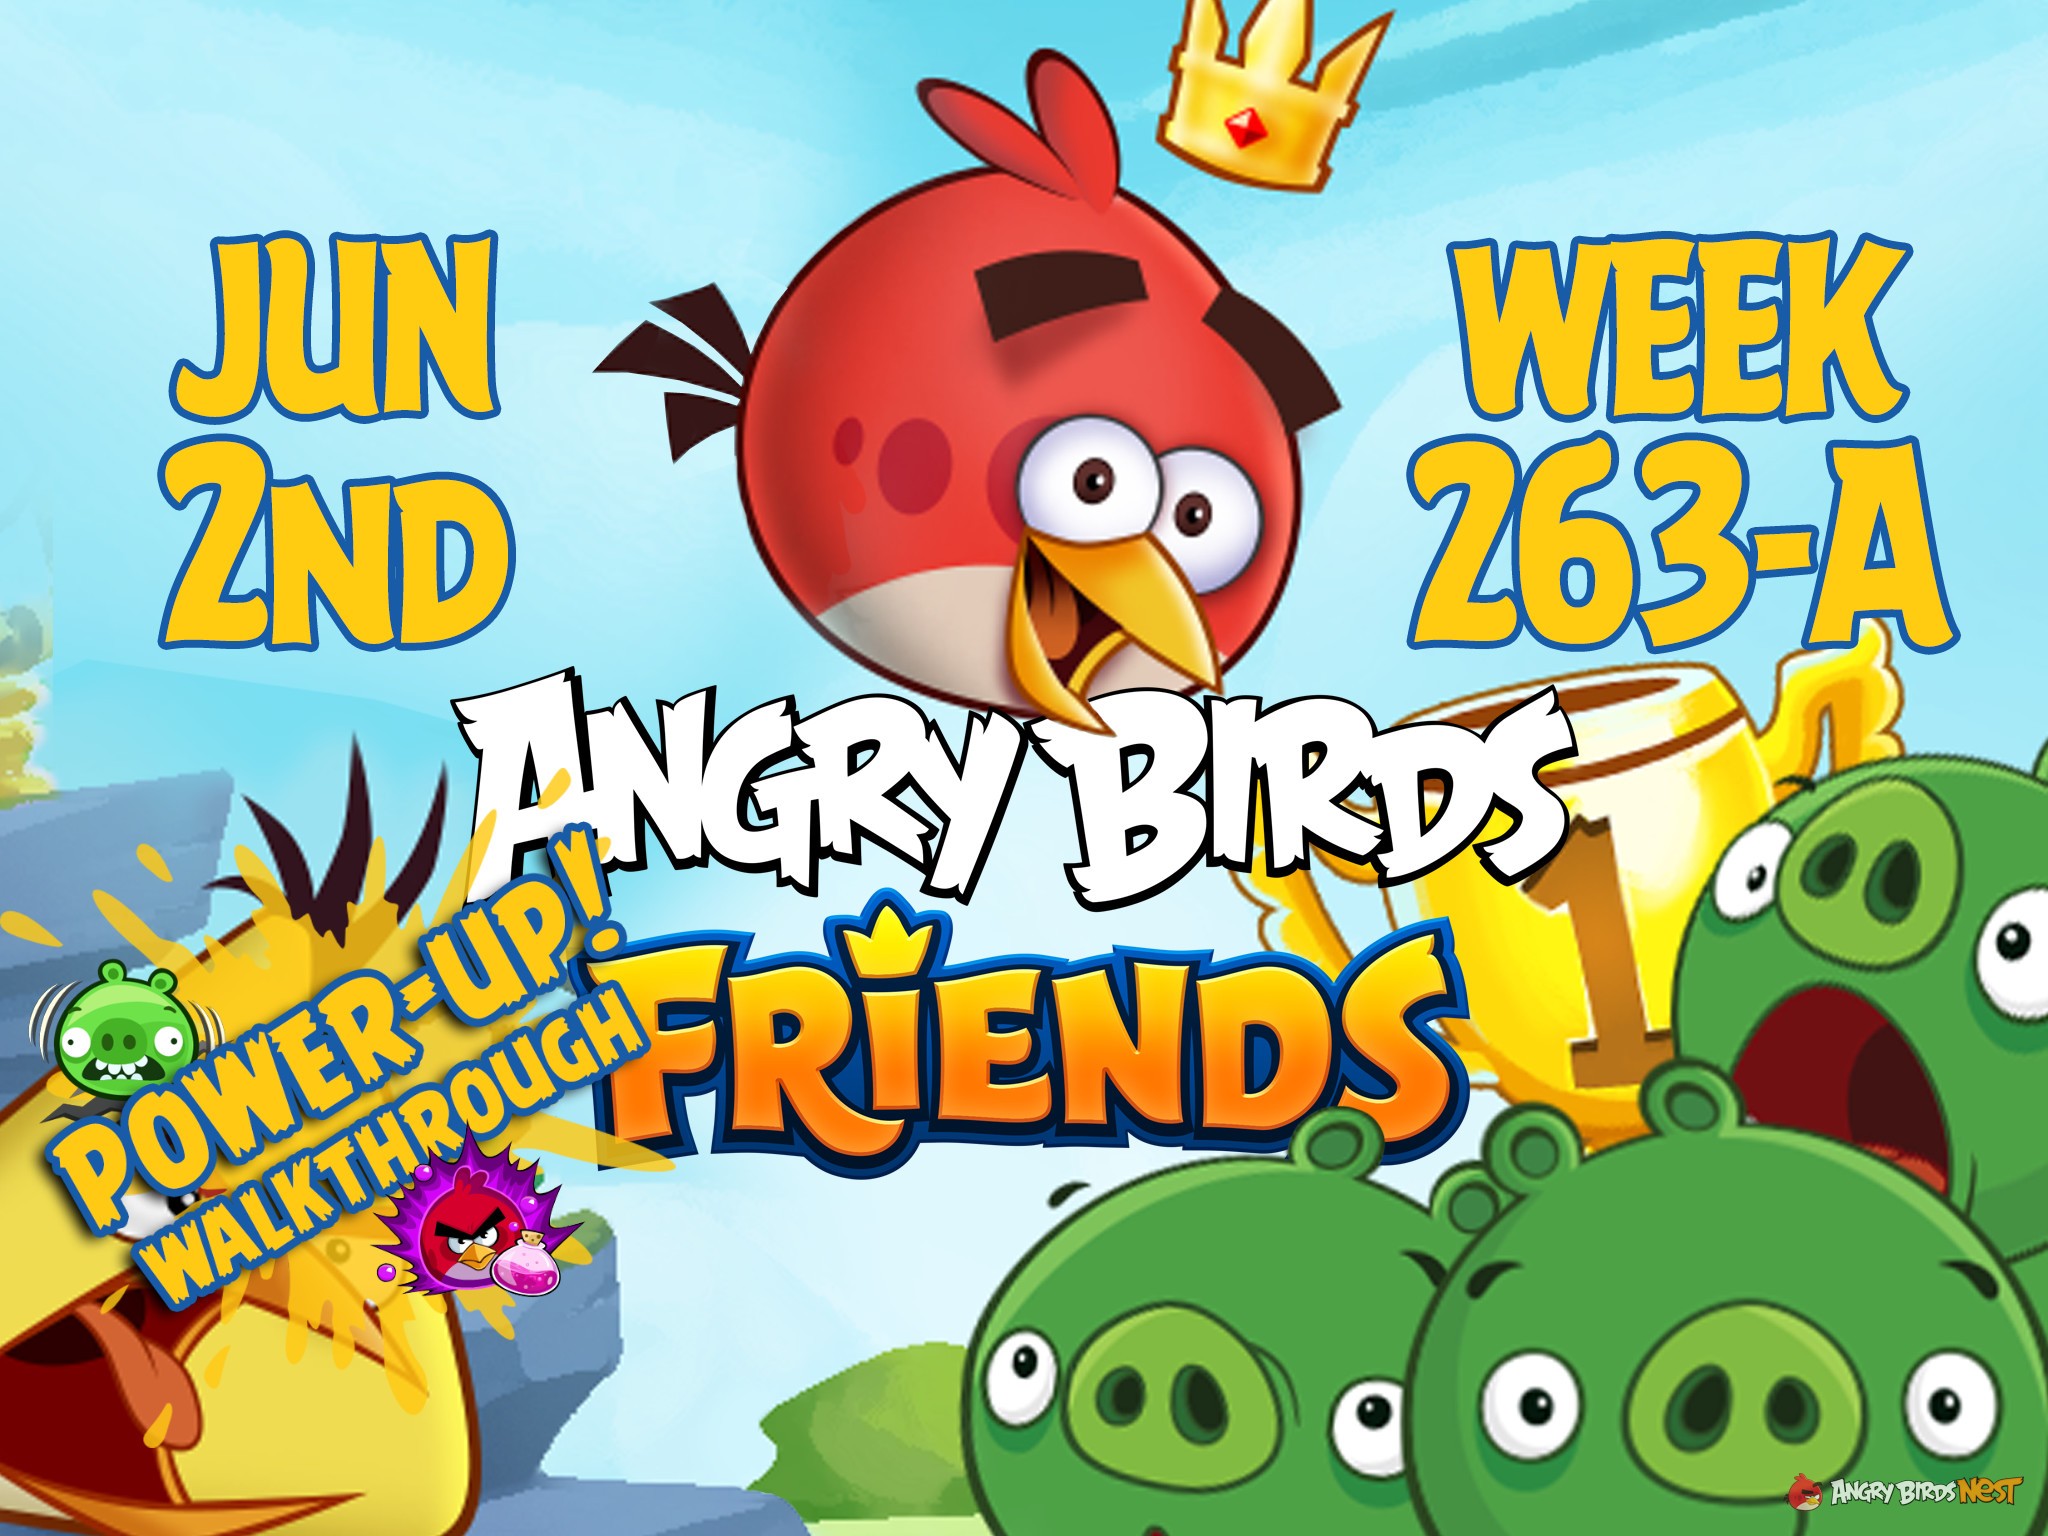 Angry Birds Friends Tournament Week 263-A Feature Image PU